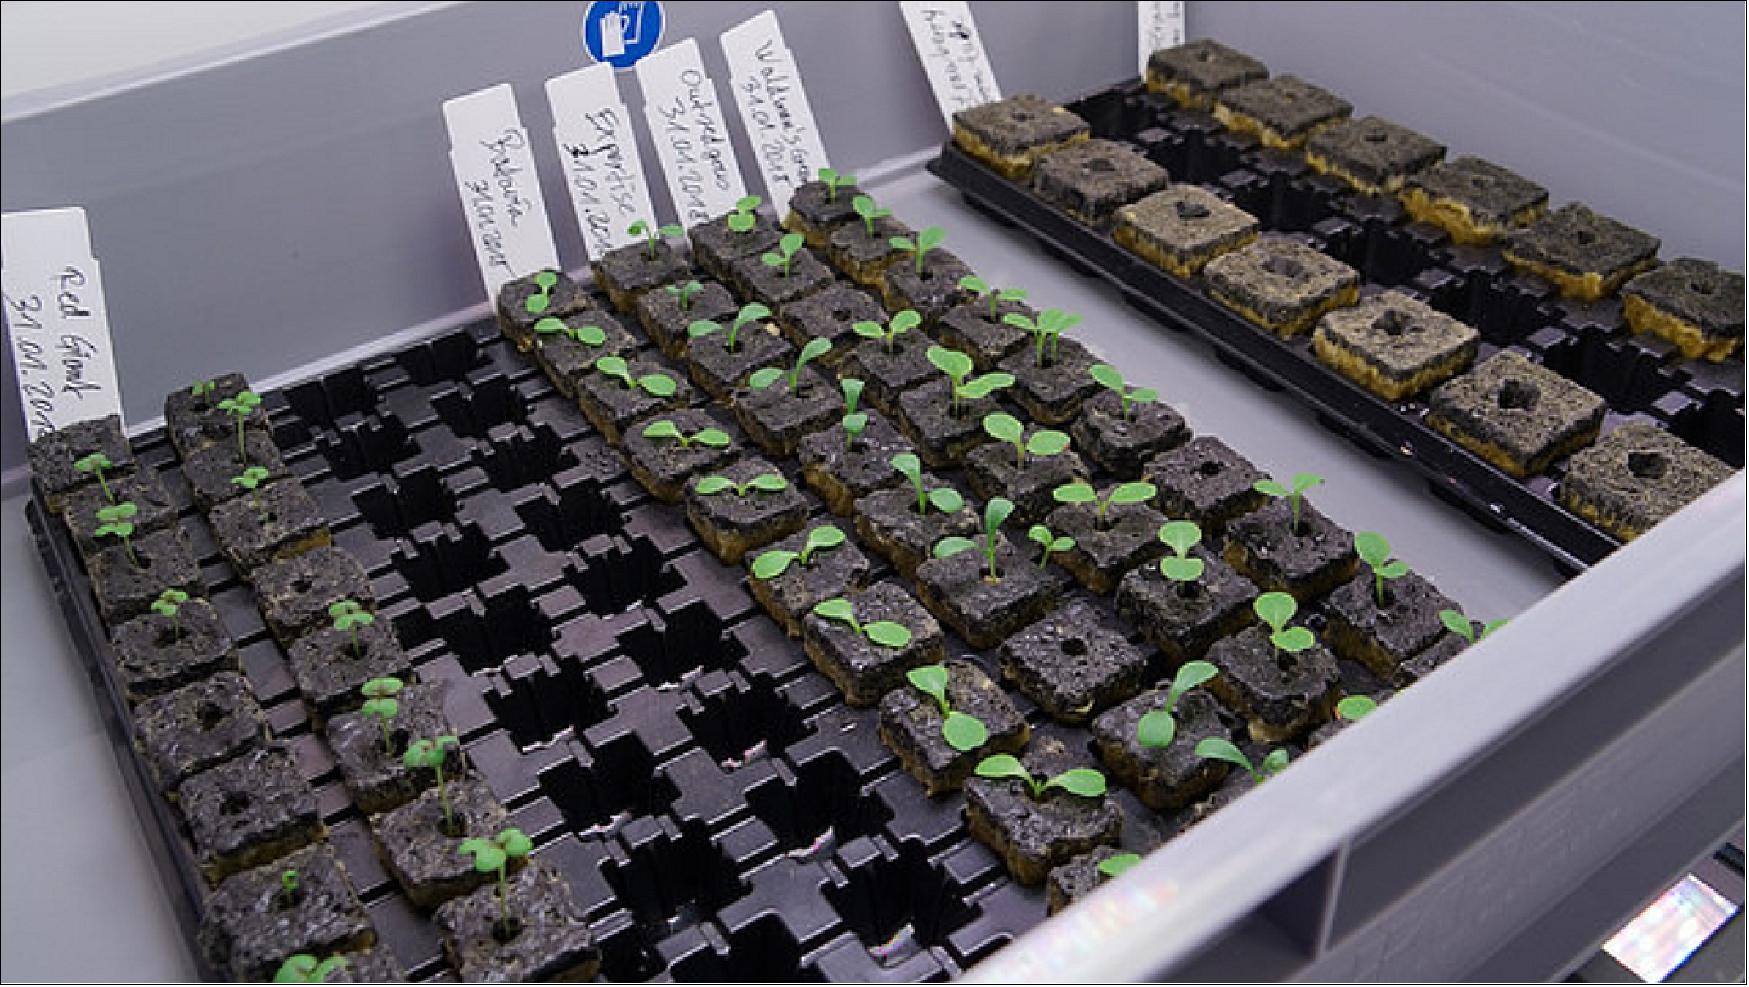 Figure 26: The EDEN ISS laboratory commences operation as a greenhouse in Antarctica. Cucumbers, tomatoes and peppers will be the first home-grown crops at the world's southernmost tip (image credit: DLR)